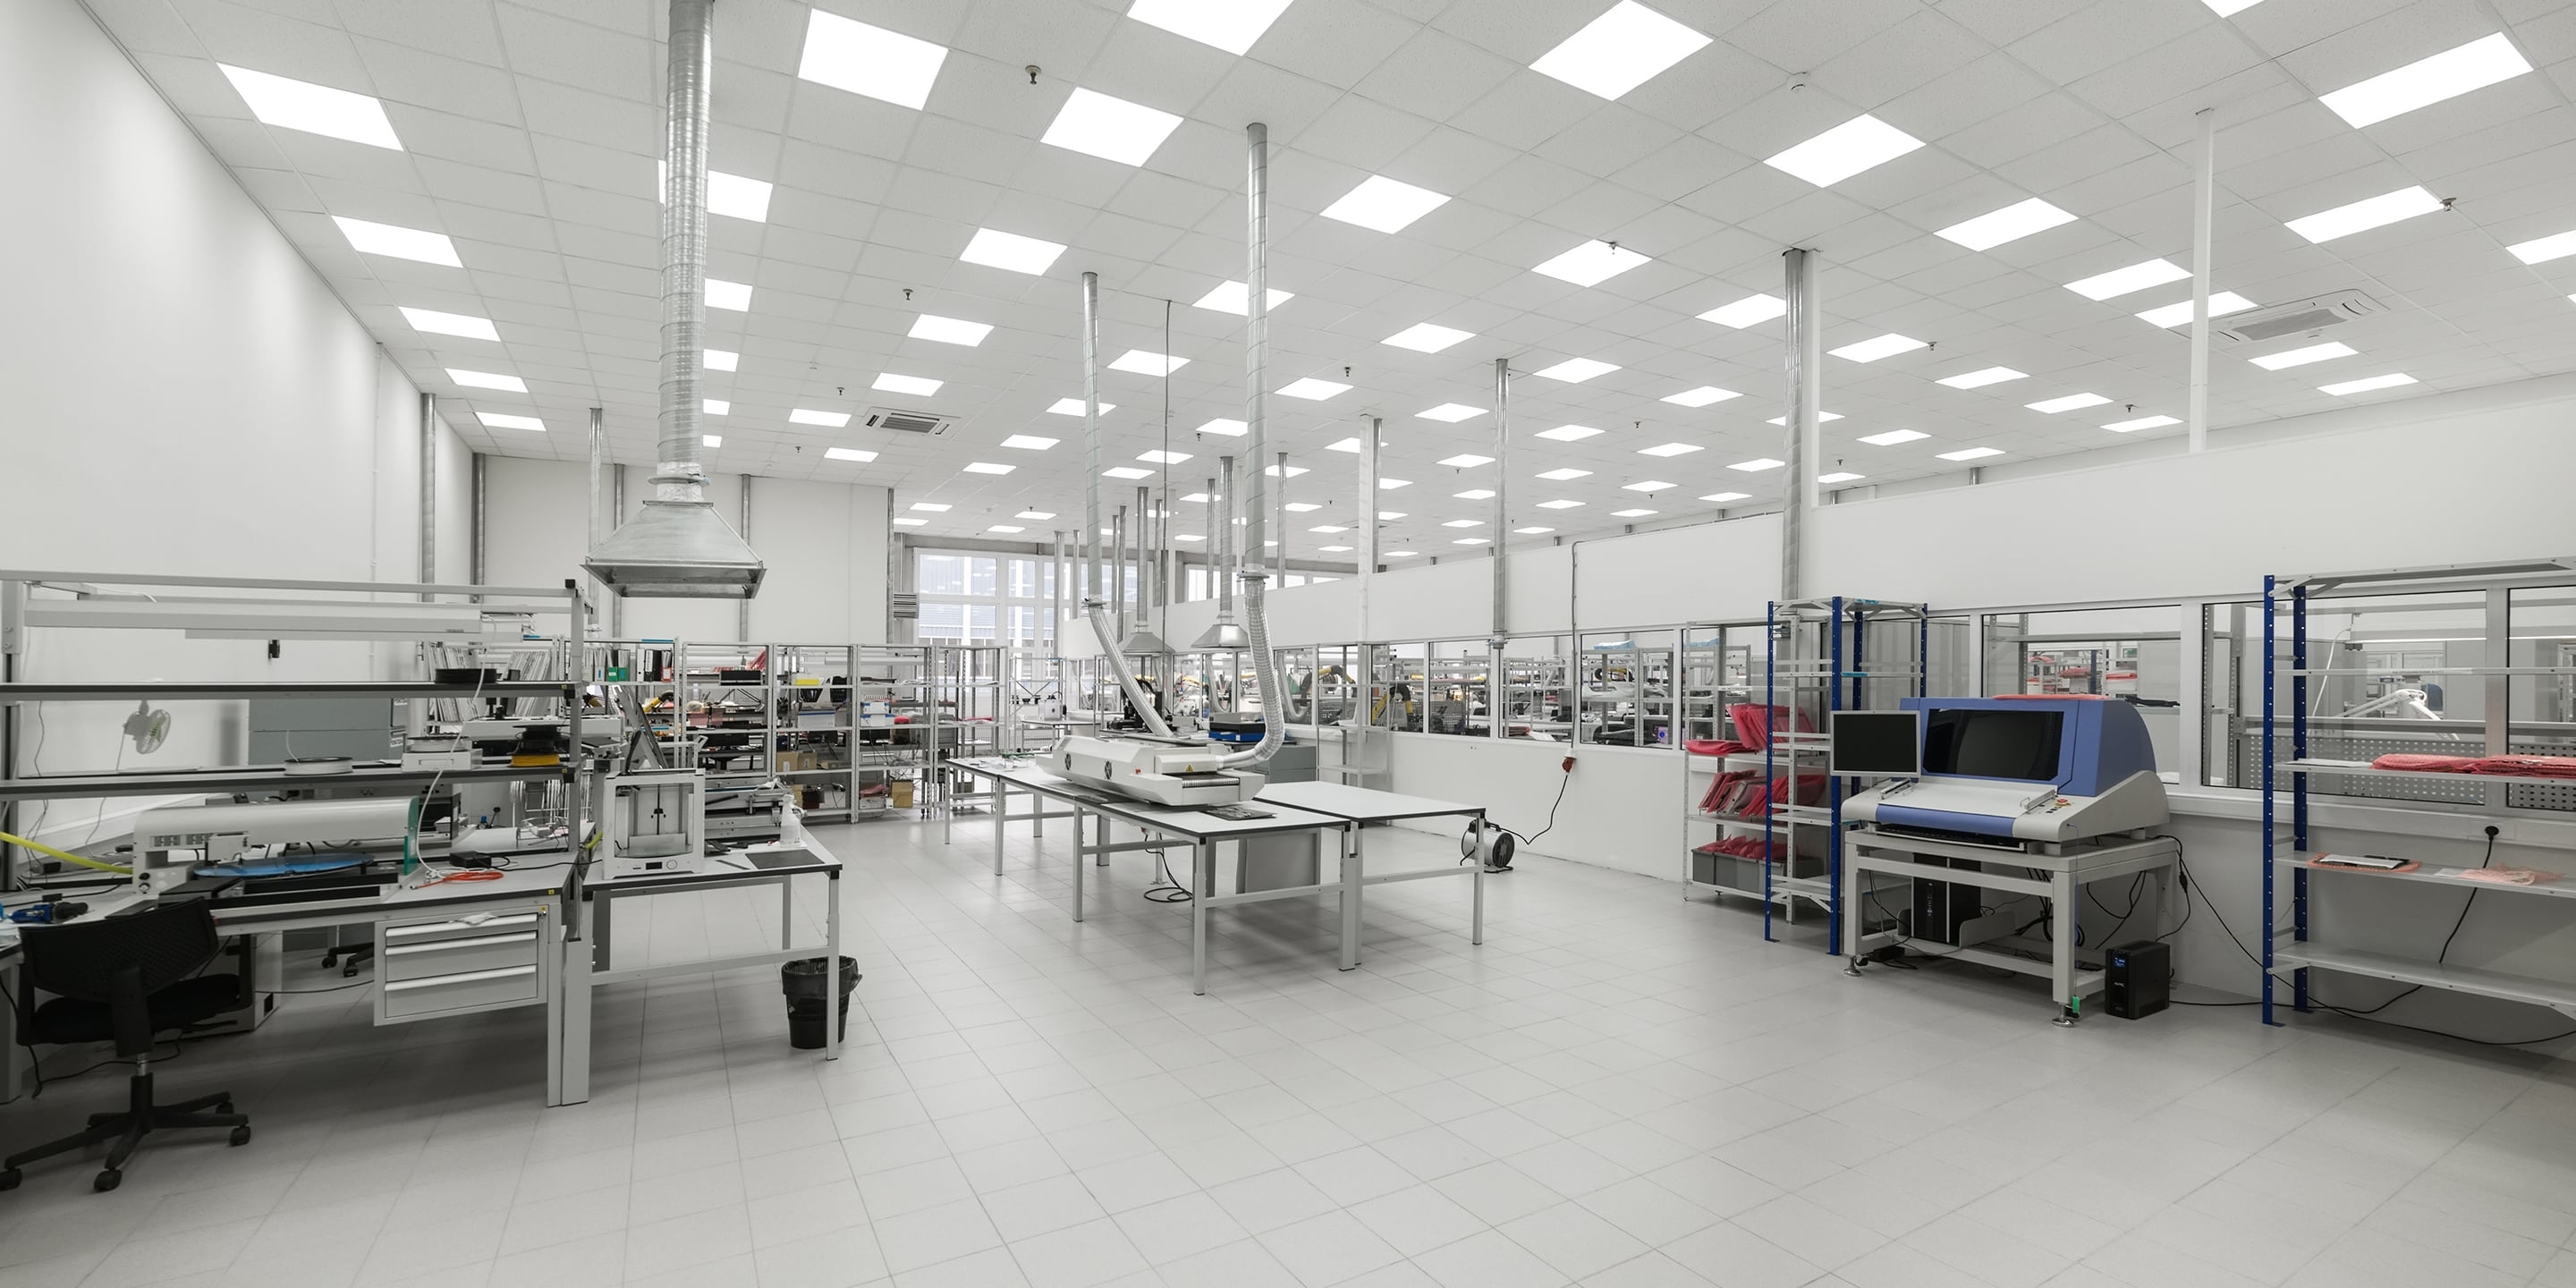 Flooring solutions for semiconductor and electronics facilities